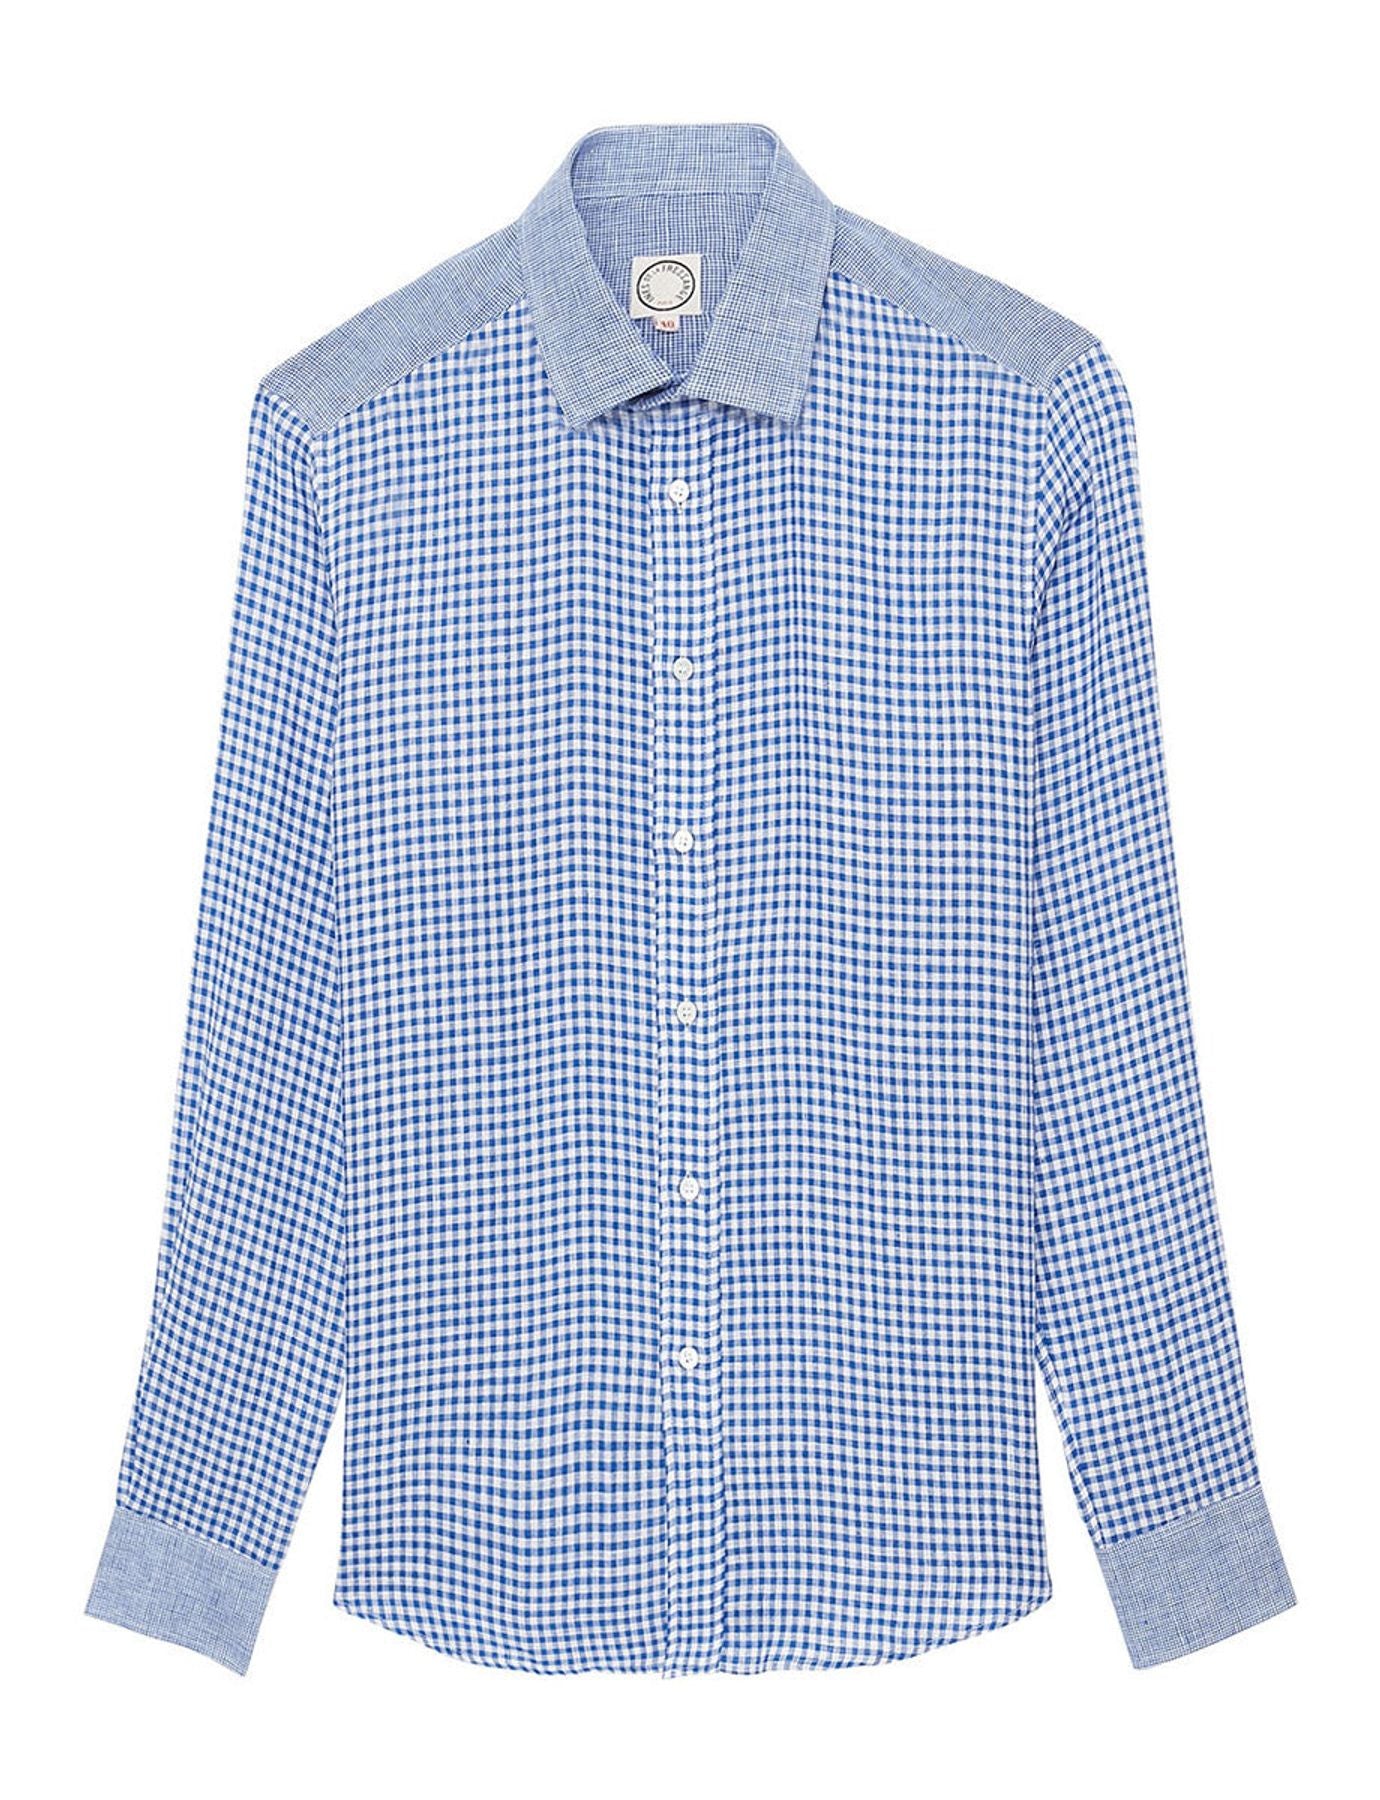 shirt-for-man-olivier-in-linen-motif-vichy-blue-and-embellishments